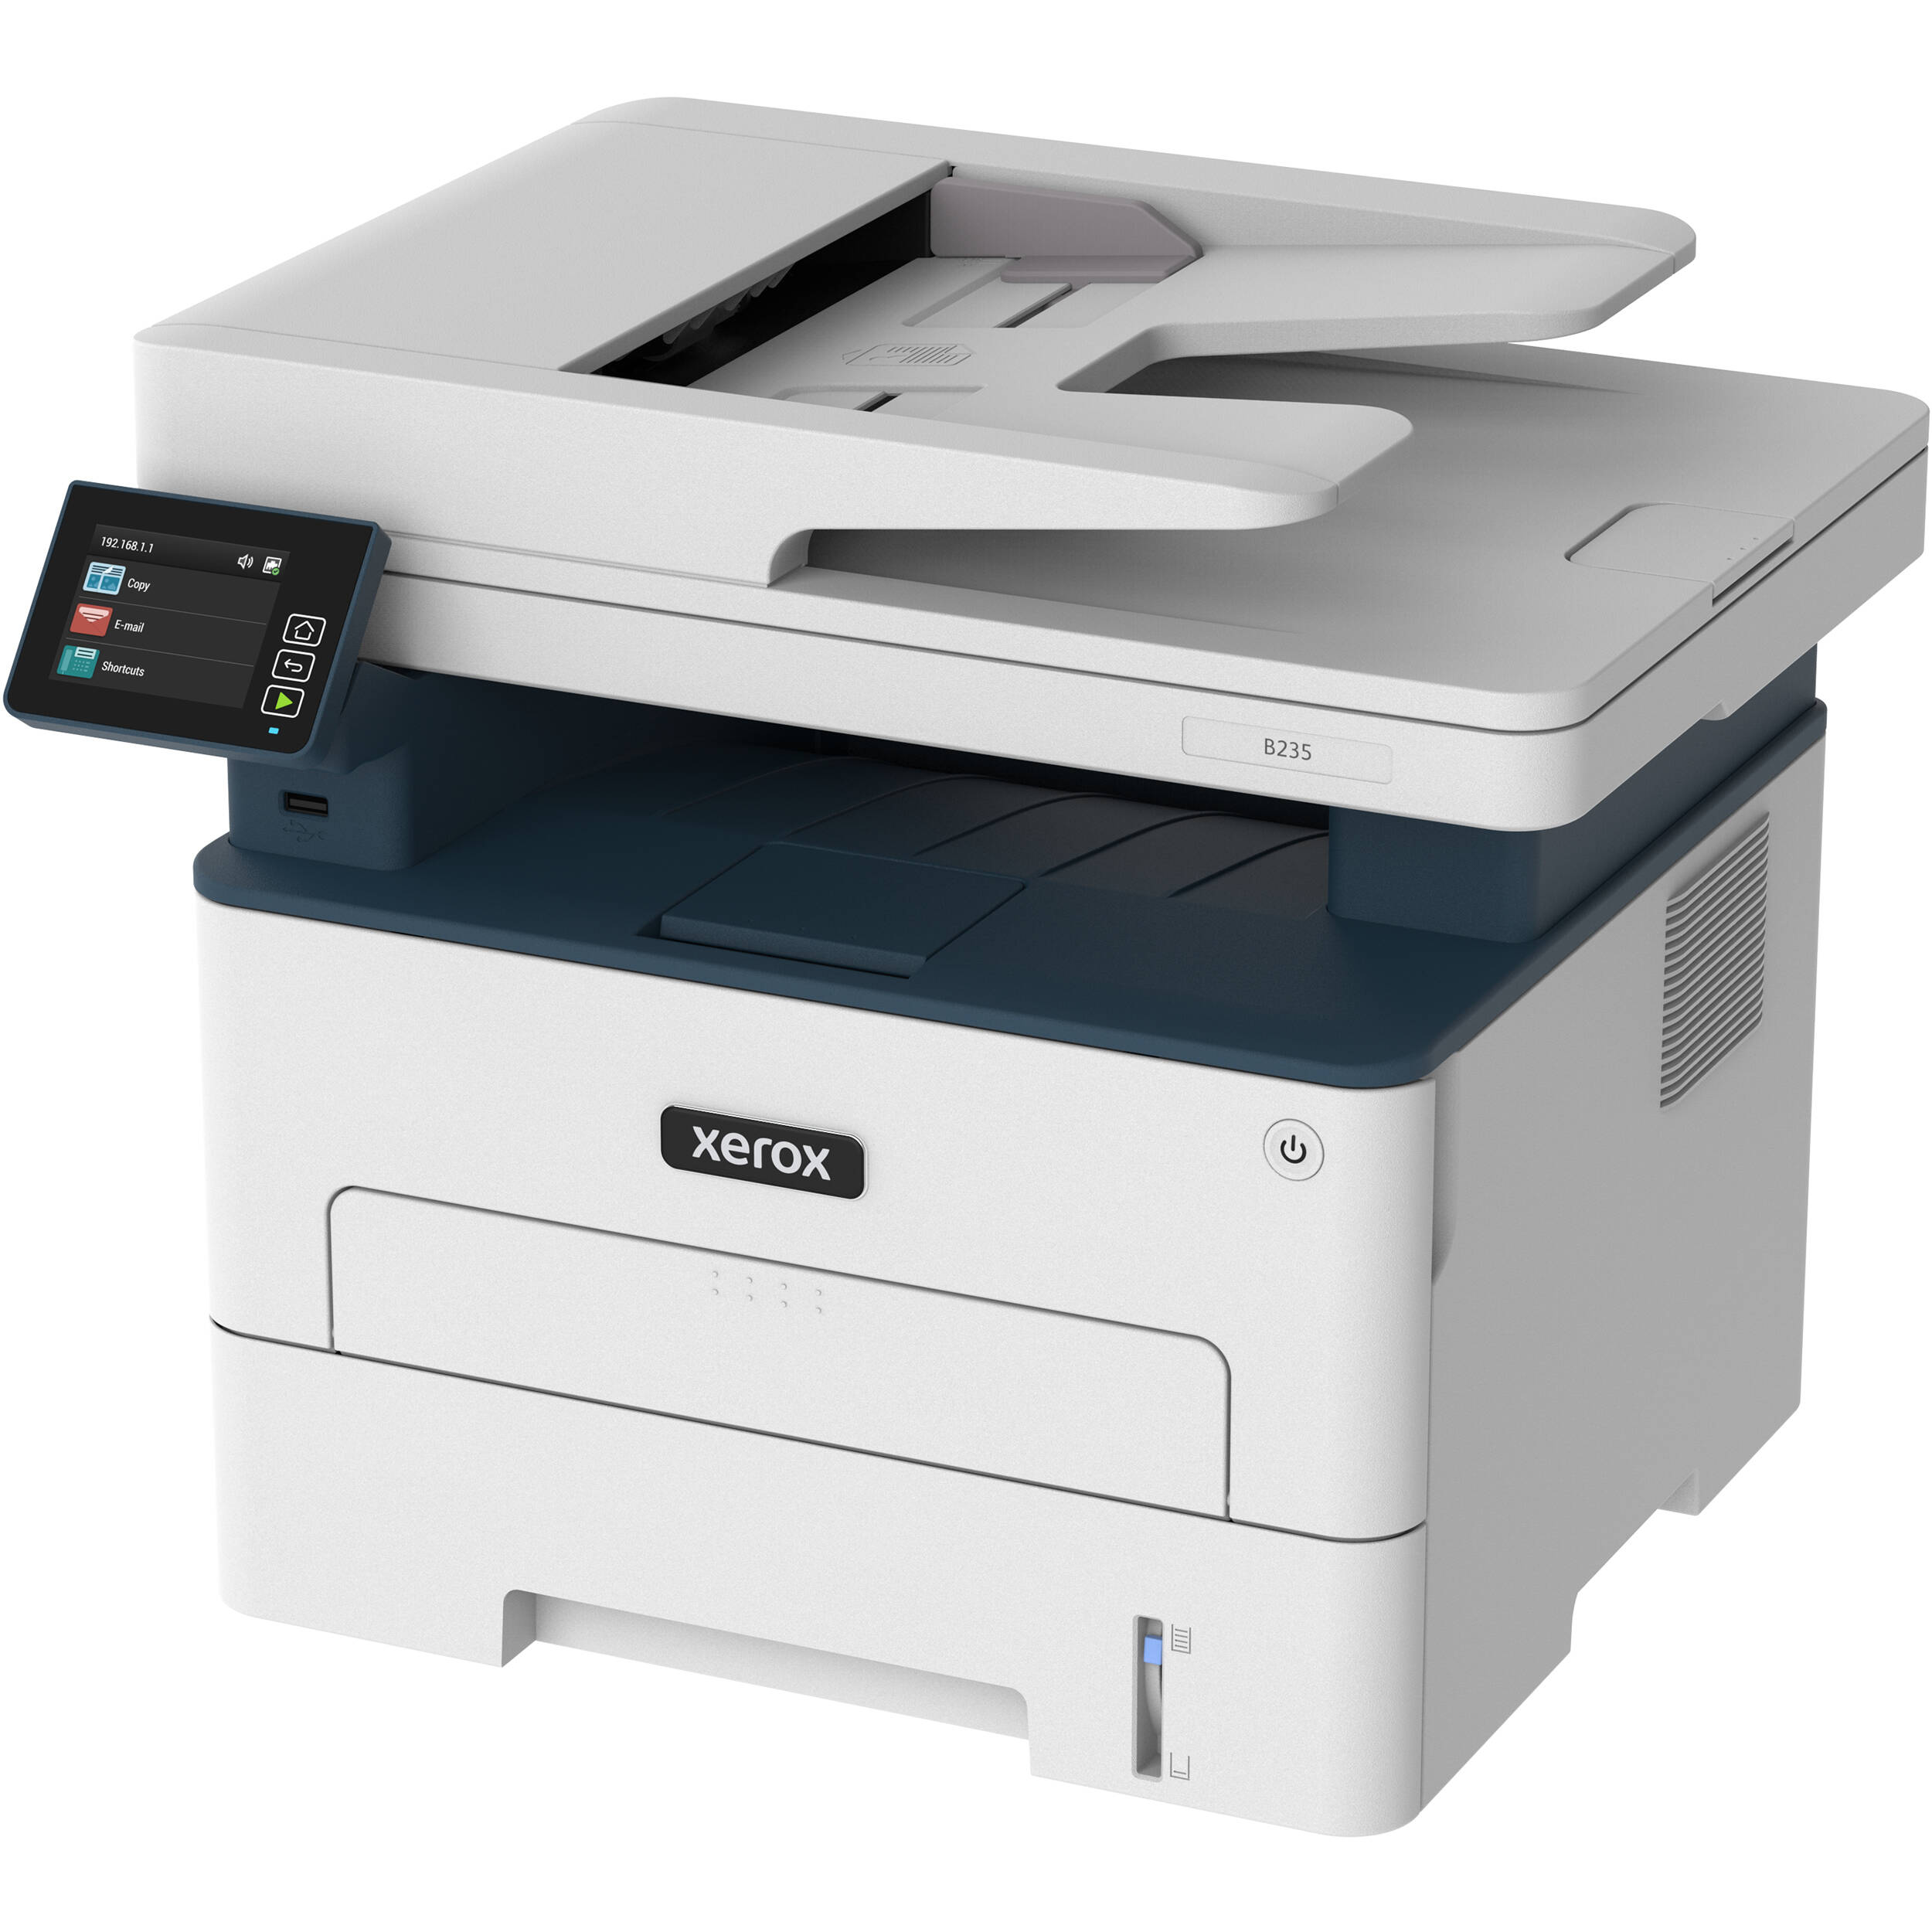 Absolute Toner Xerox B235 (B235/DNI) Wireless Monochrome All-In-One Laser Printer, Print/Scan/Copy/Fax - Easy To Use Black And White Printer Showroom Monochrome Copiers